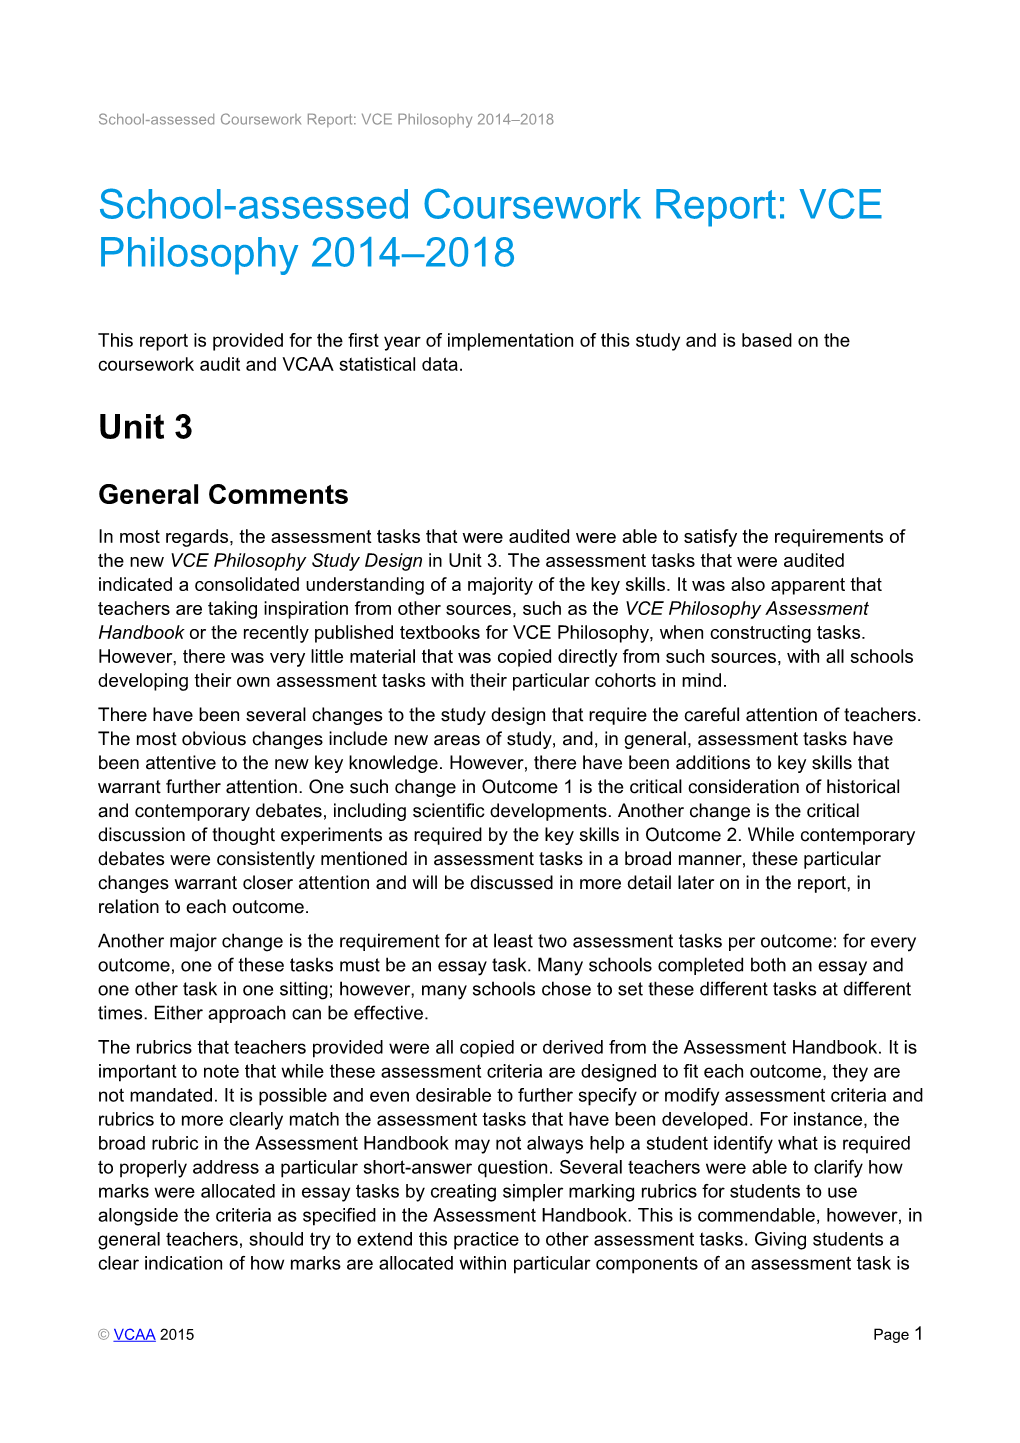 School-Assessed Coursework Report: VCE Philosophy 2014 2018